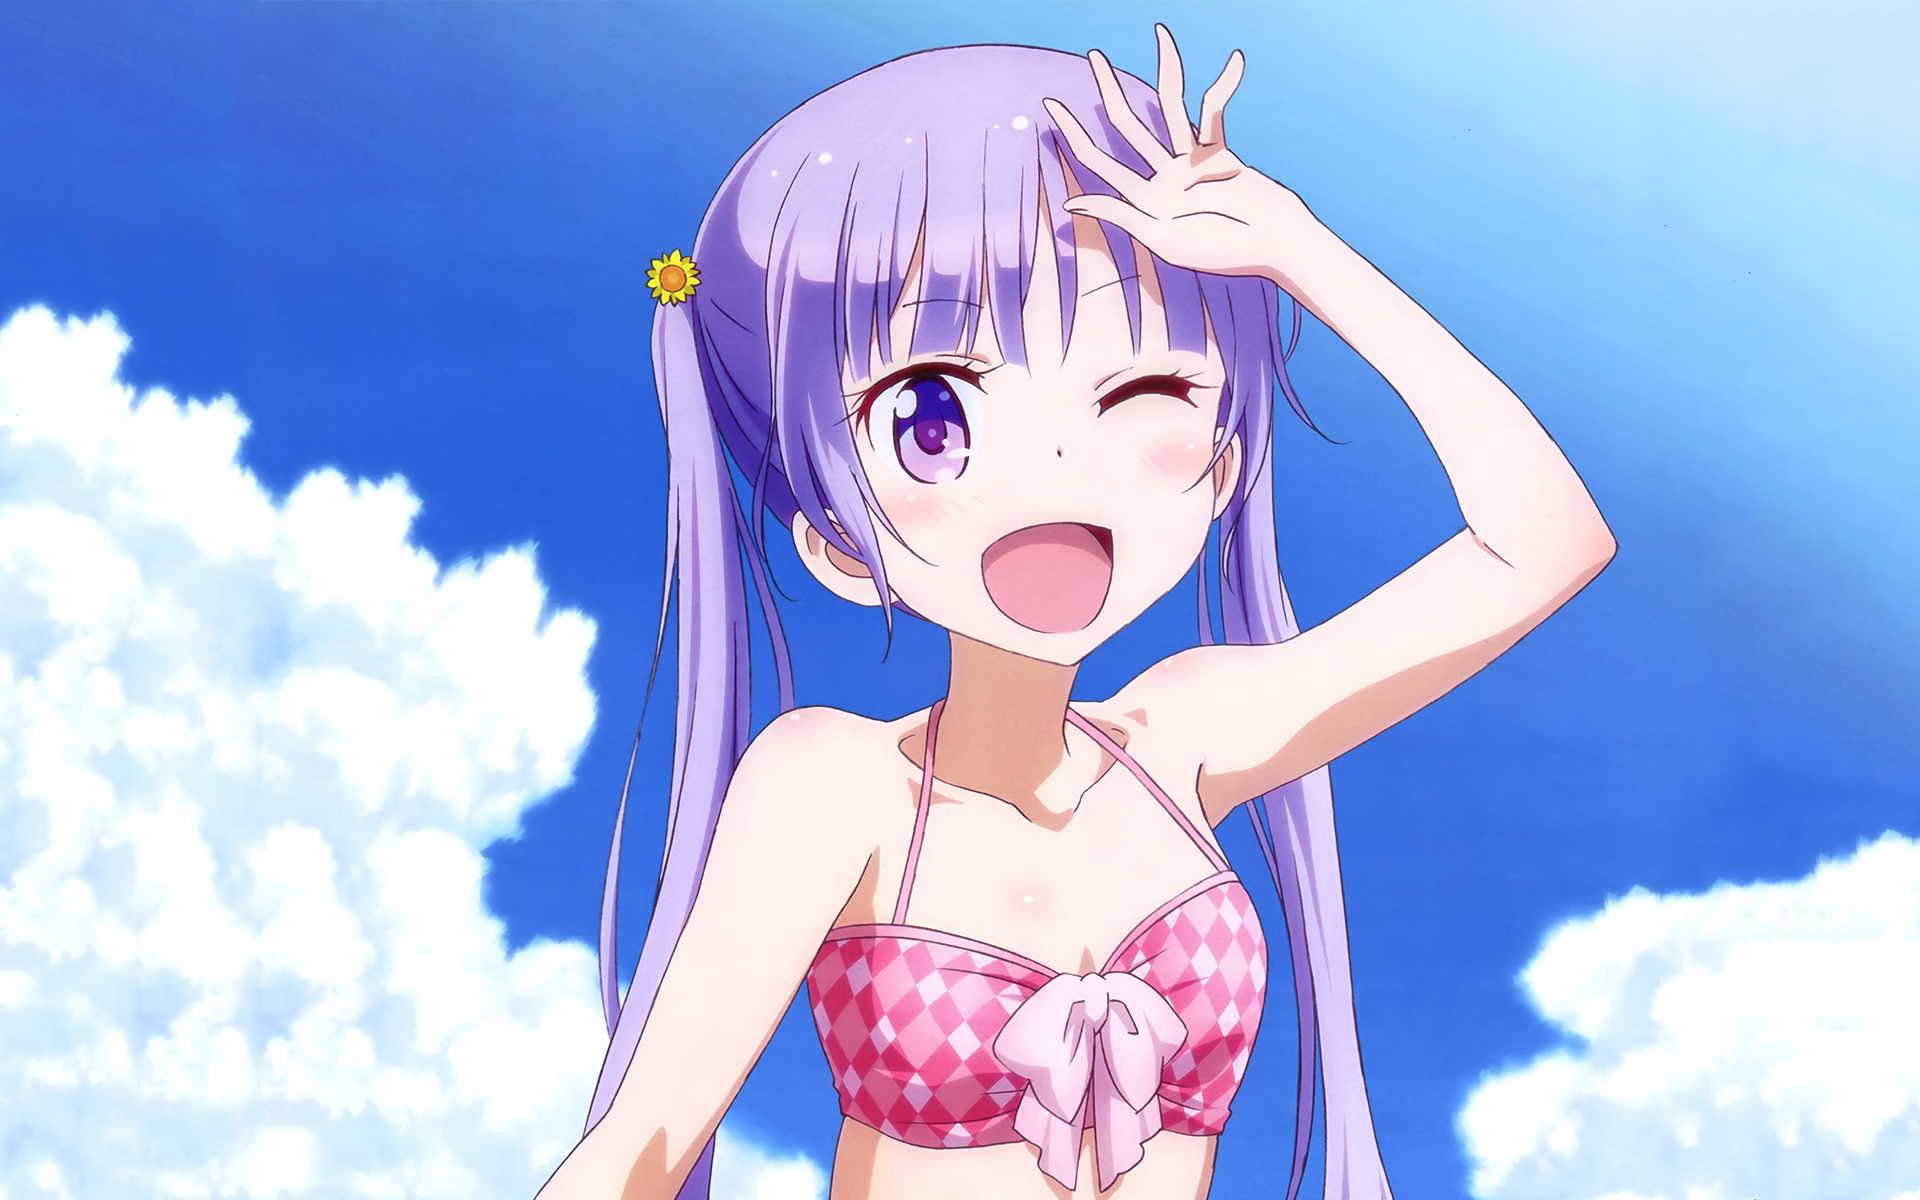 New Game! Backgrounds, Compatible - PC, Mobile, Gadgets| 1920x1200 px